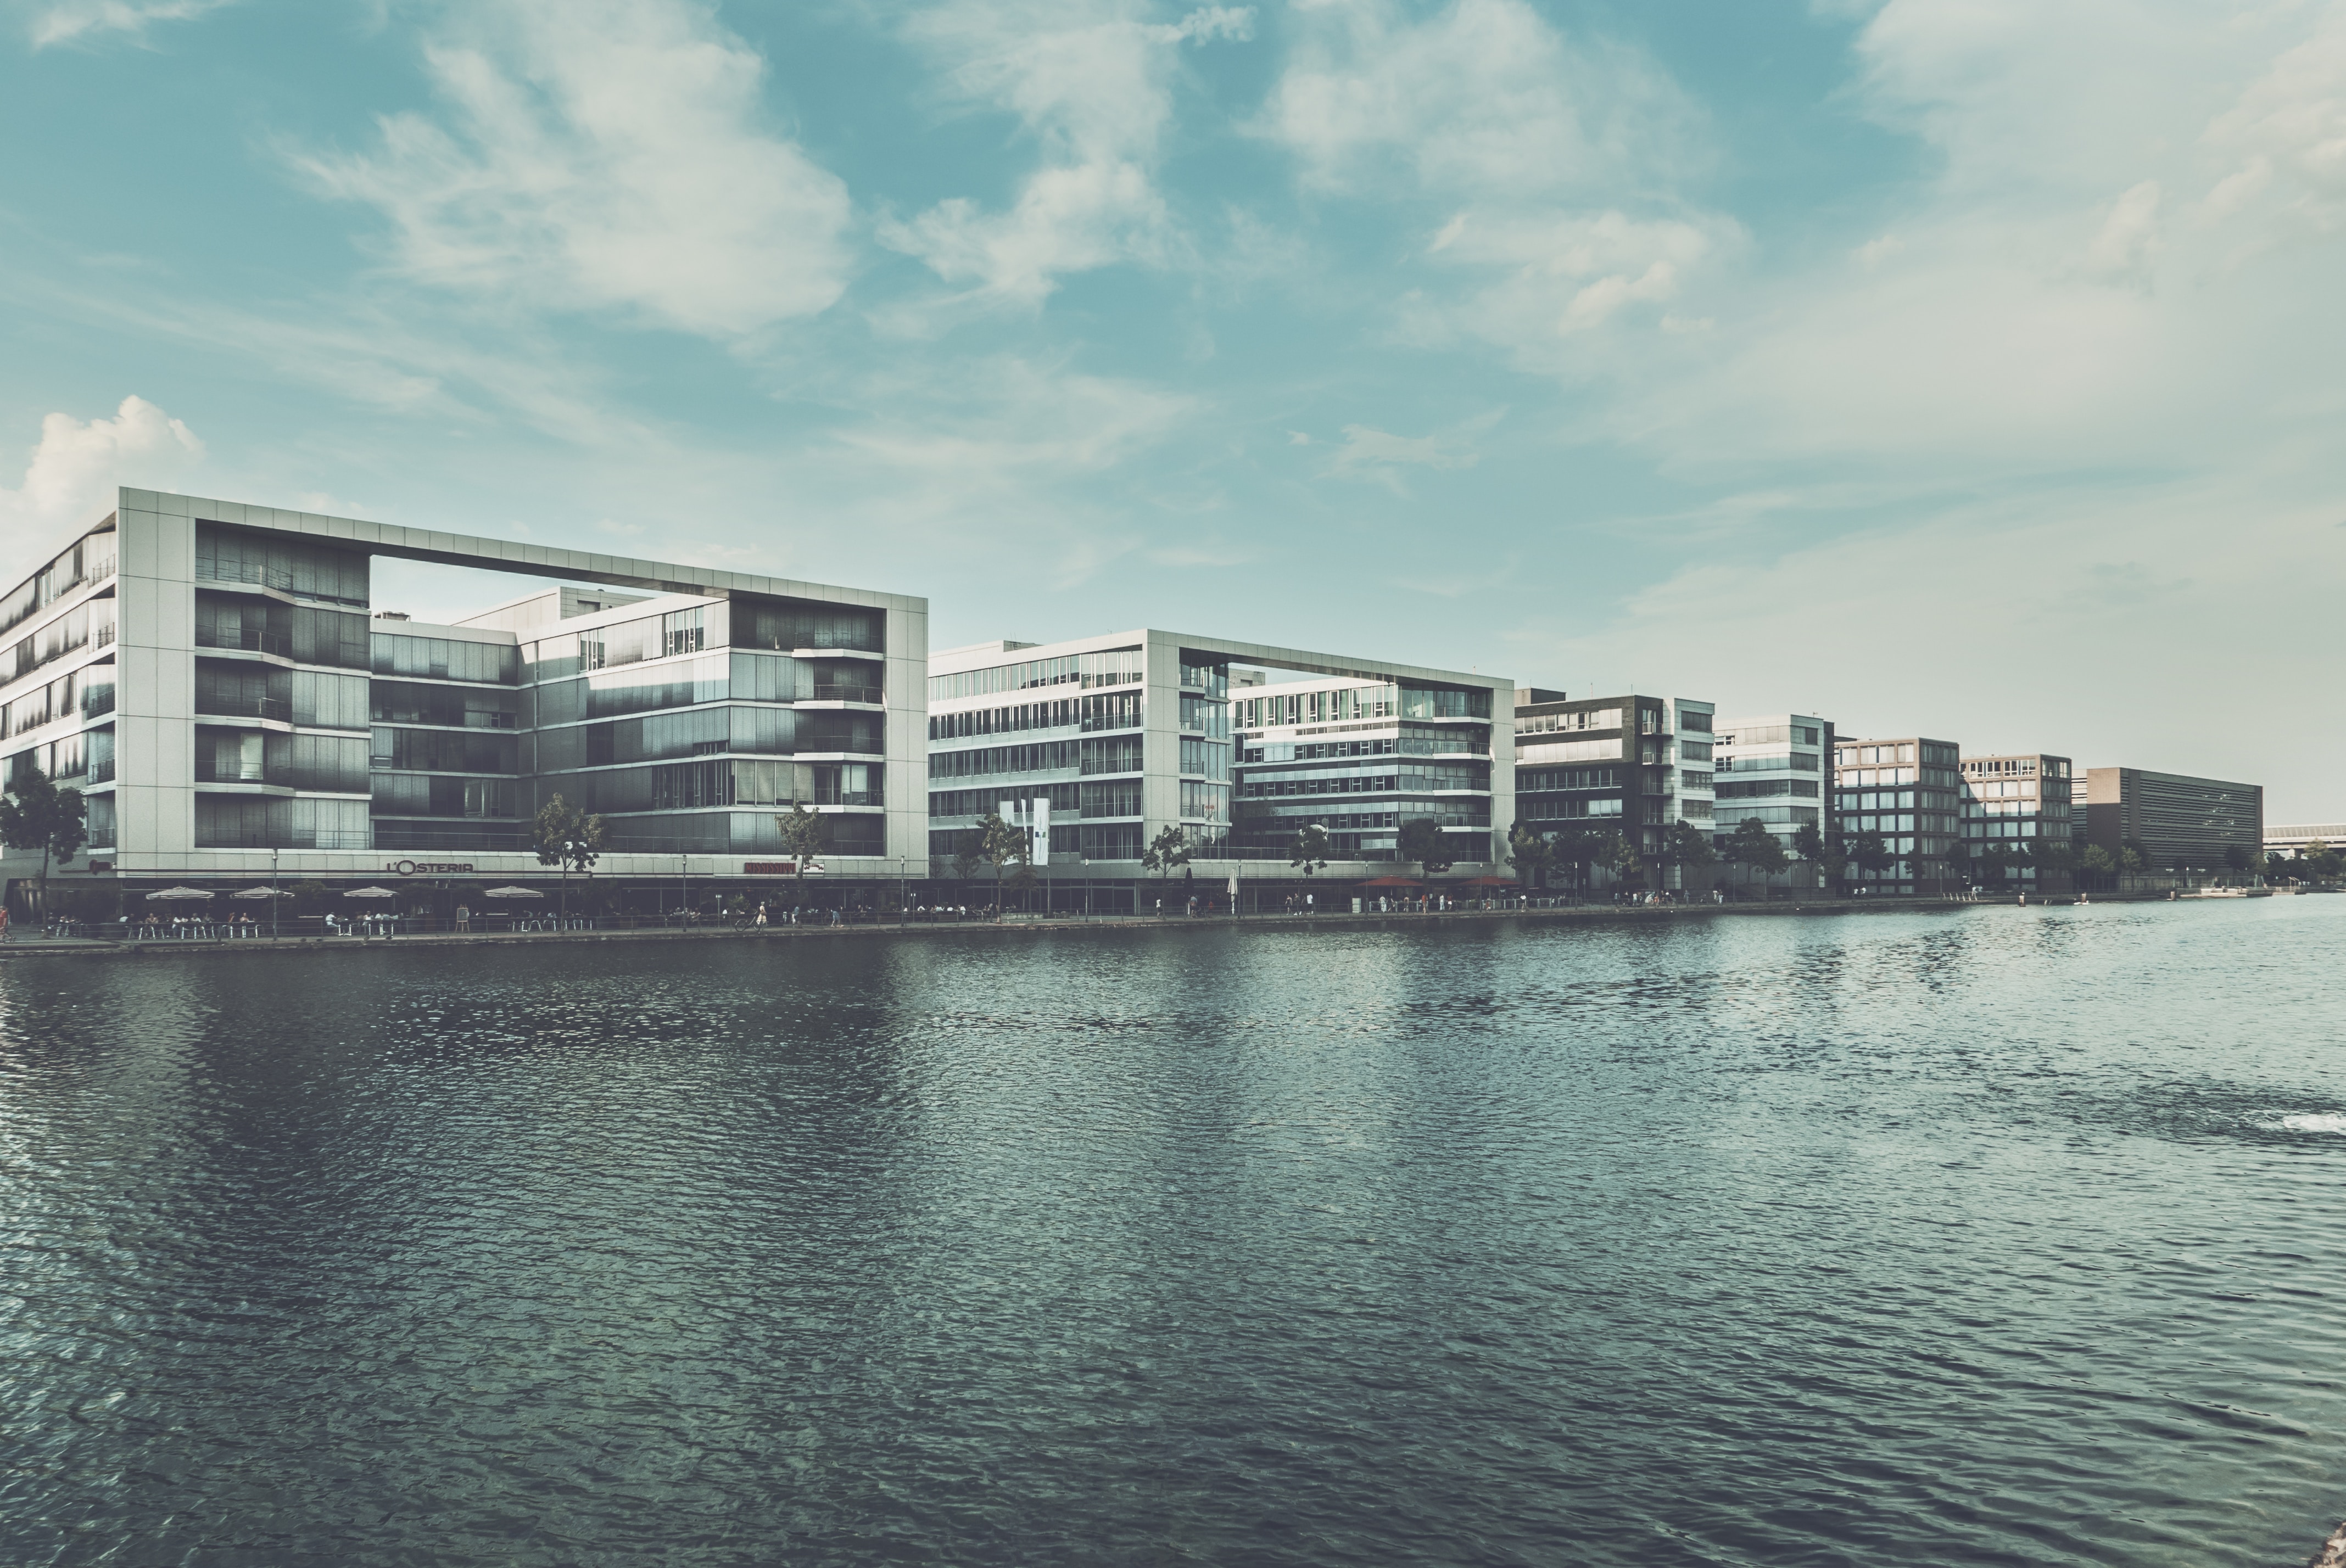 Kuwait Single Family Office Acquires "Neudorfer Tor" in Duisburg